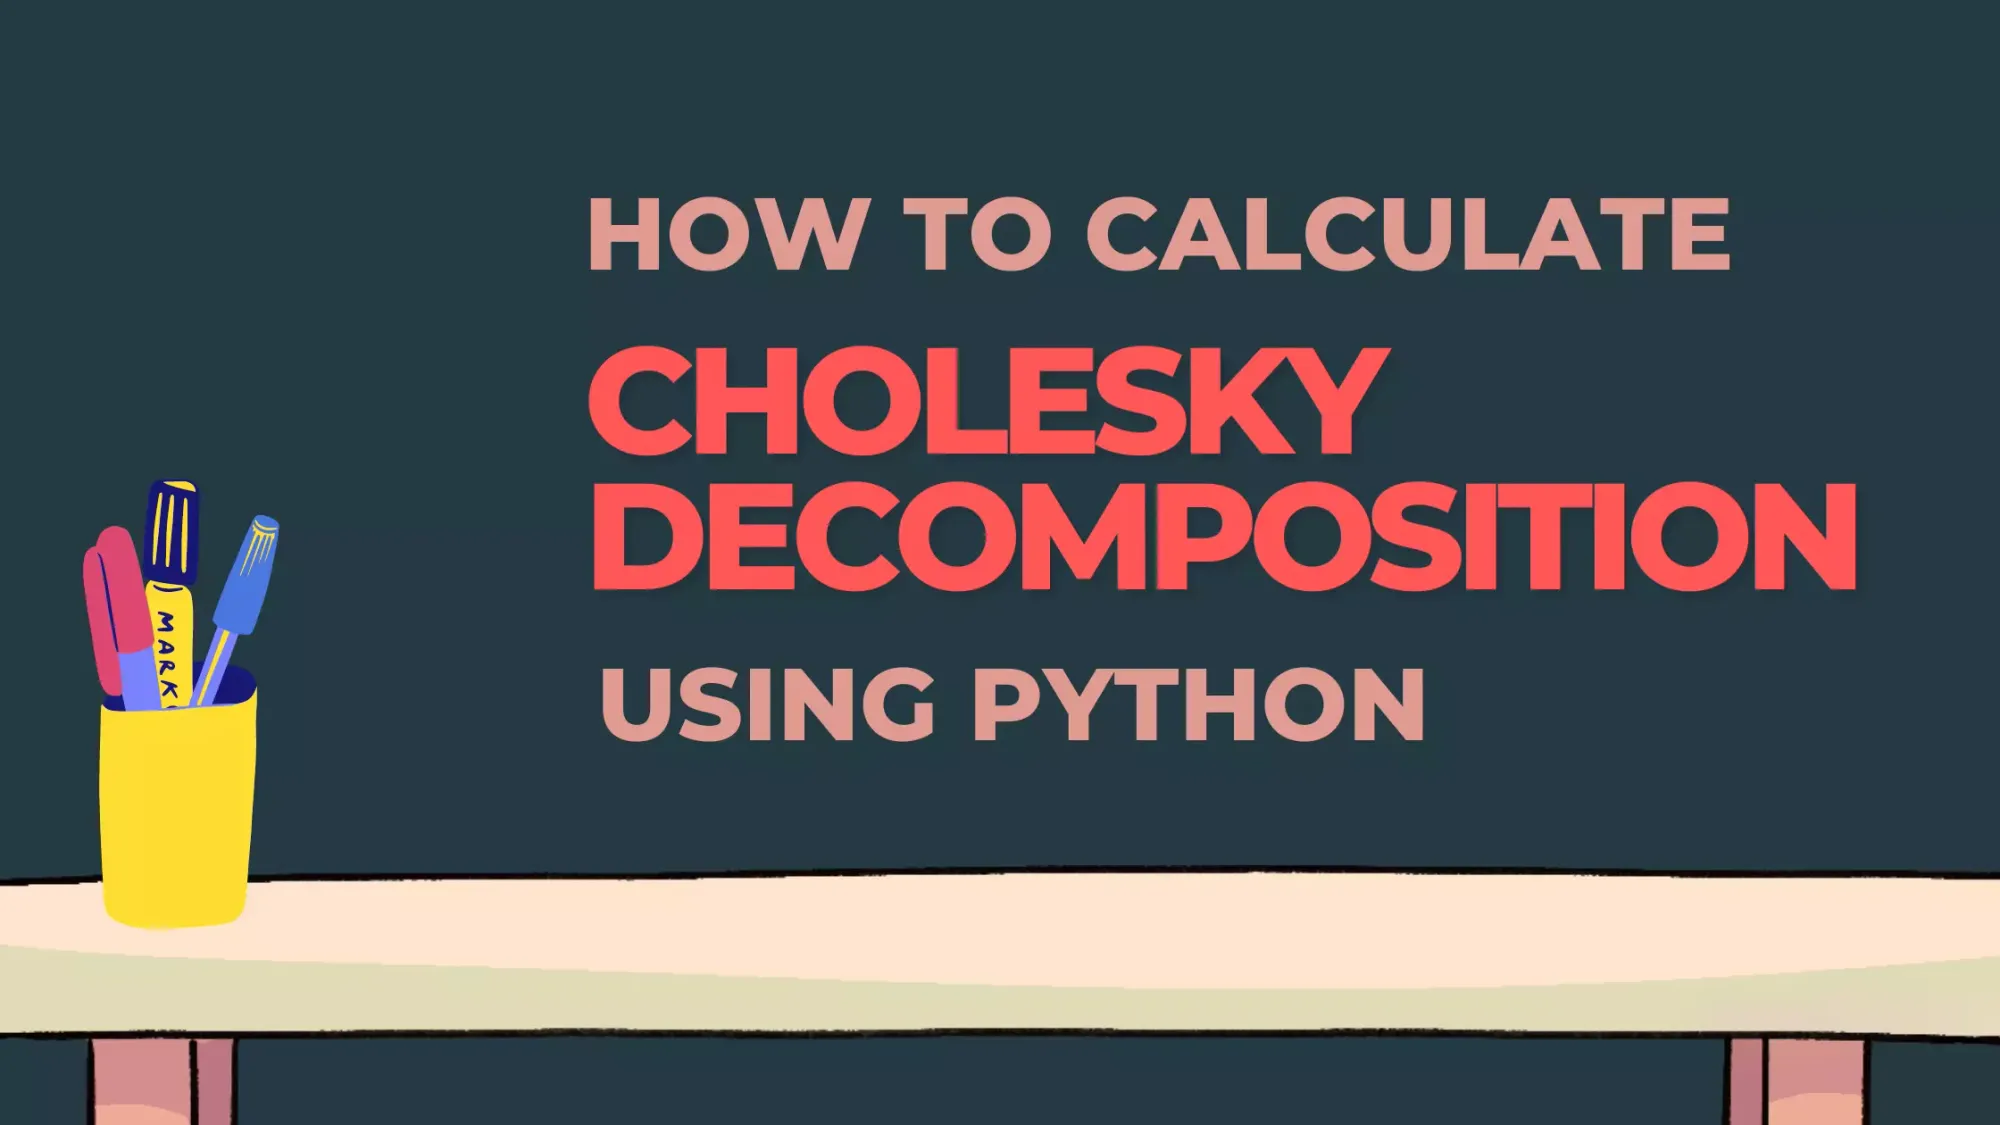 How to Calculate Cholesky Decomposition in Python